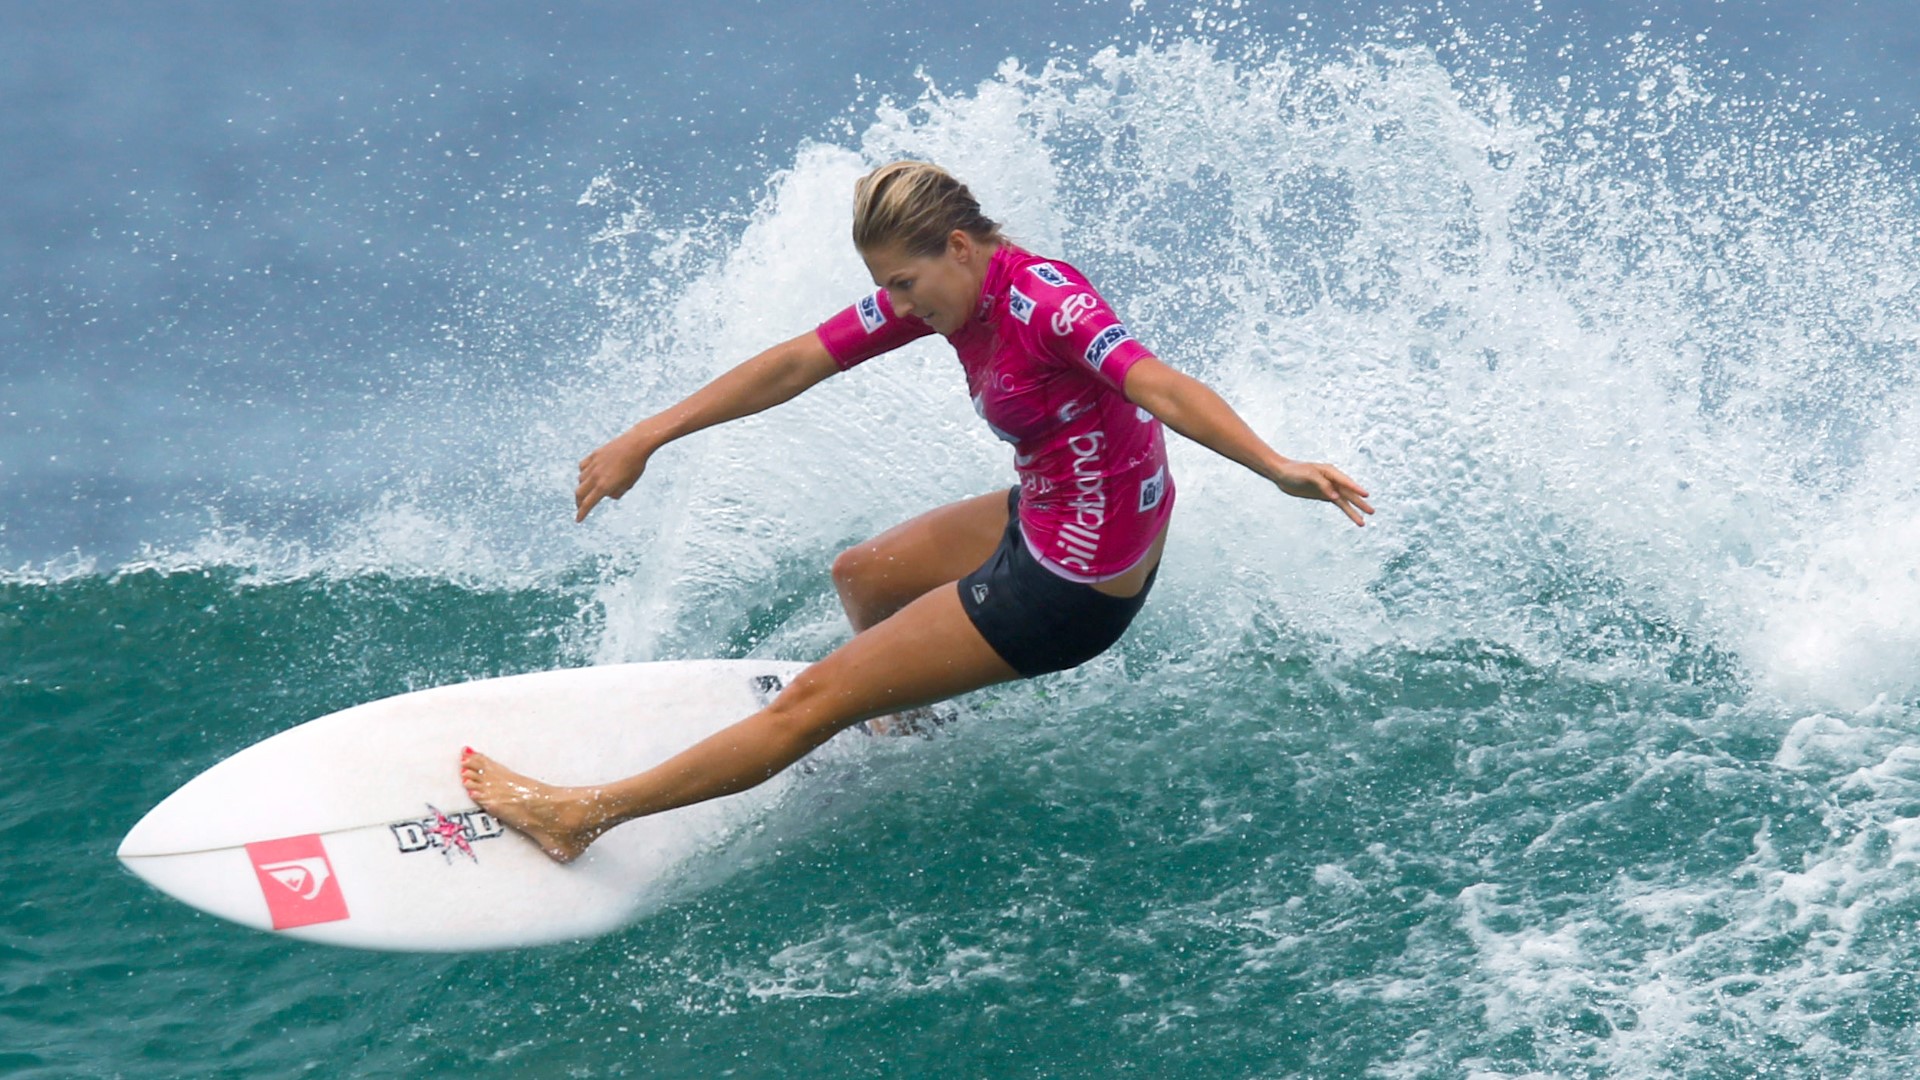 Surfing and skateboarding will be a part of the Tokyo Olympic games.